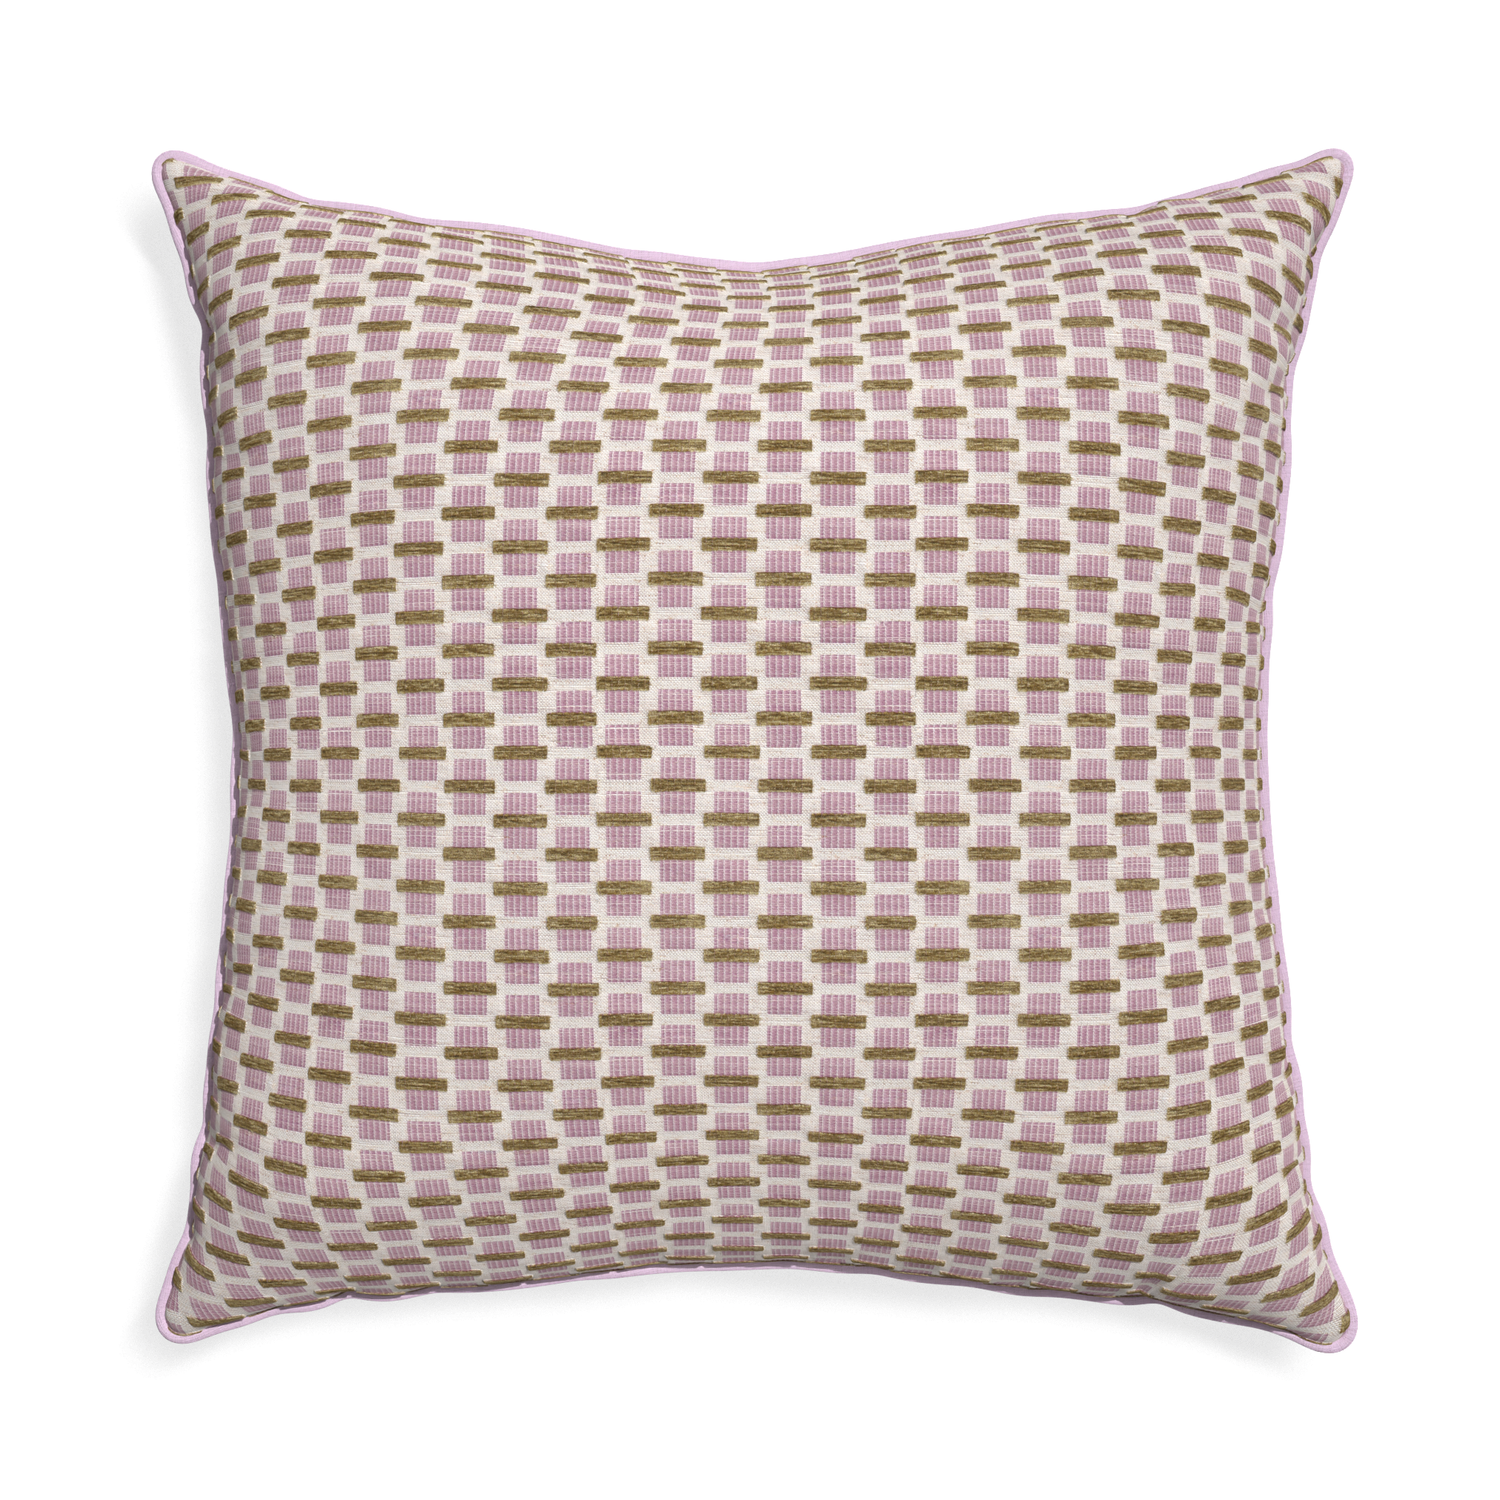 Euro-sham willow orchid custom pink geometric chenillepillow with l piping on white background